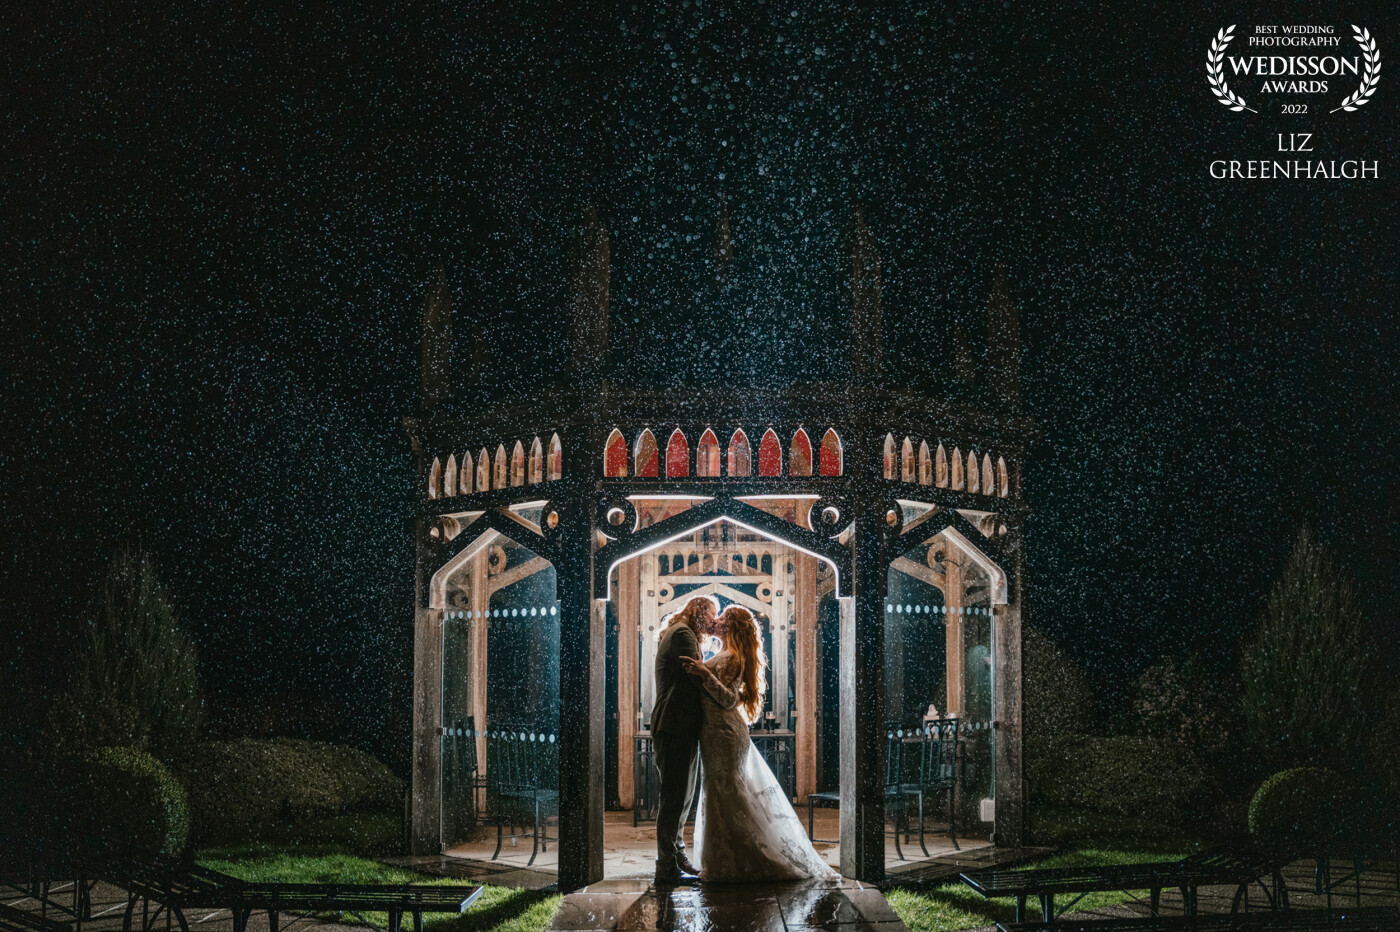 No one wants rain on their wedding day but these guys wanted an epic shot in the rain if it happened.  It rained and we created magic at The Old Hall Ely